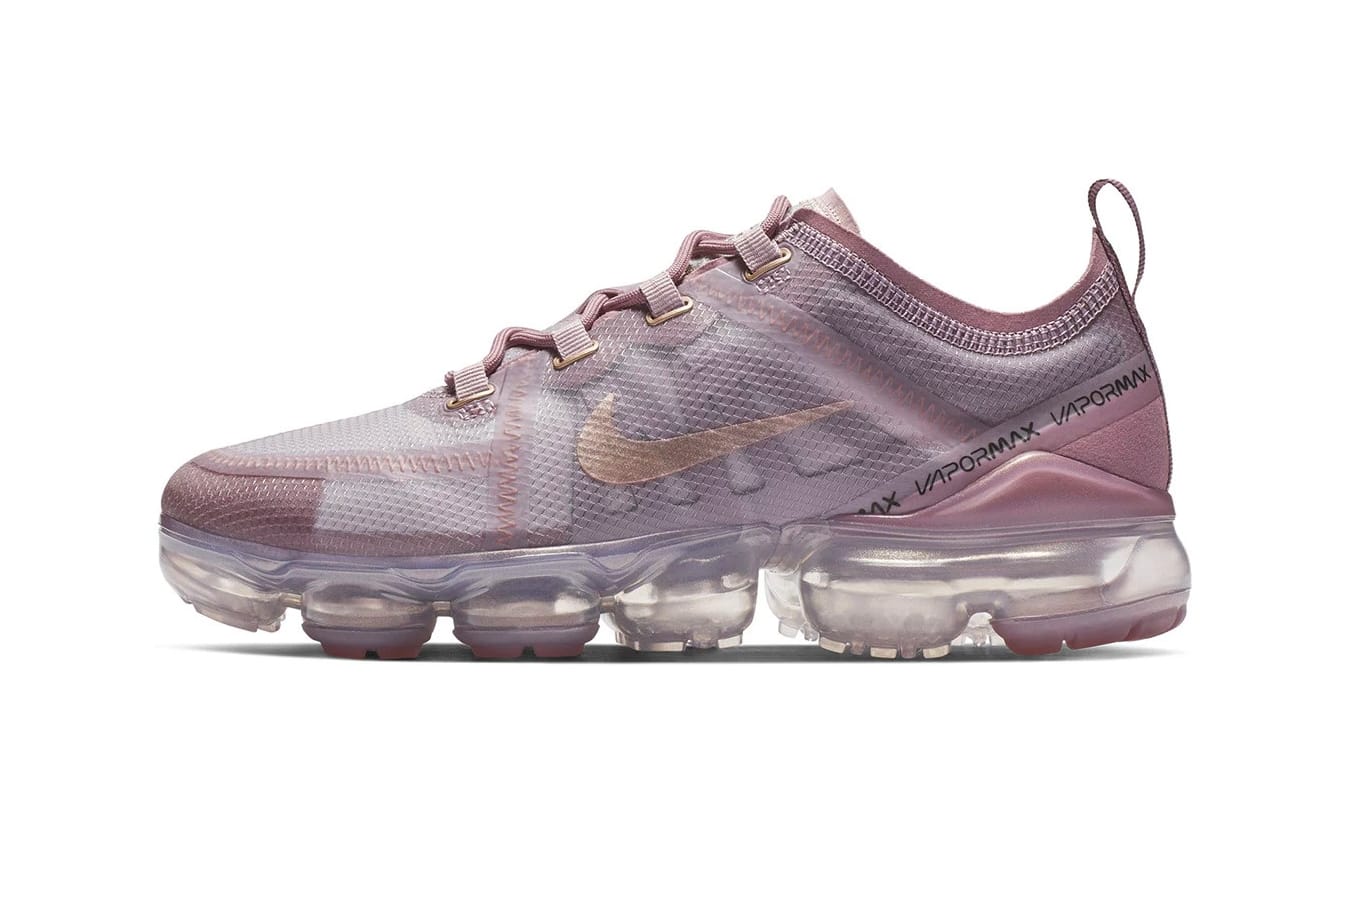 A New Nike Air VaporMax 2019 Colorway Surfaces | HYPEBEAST